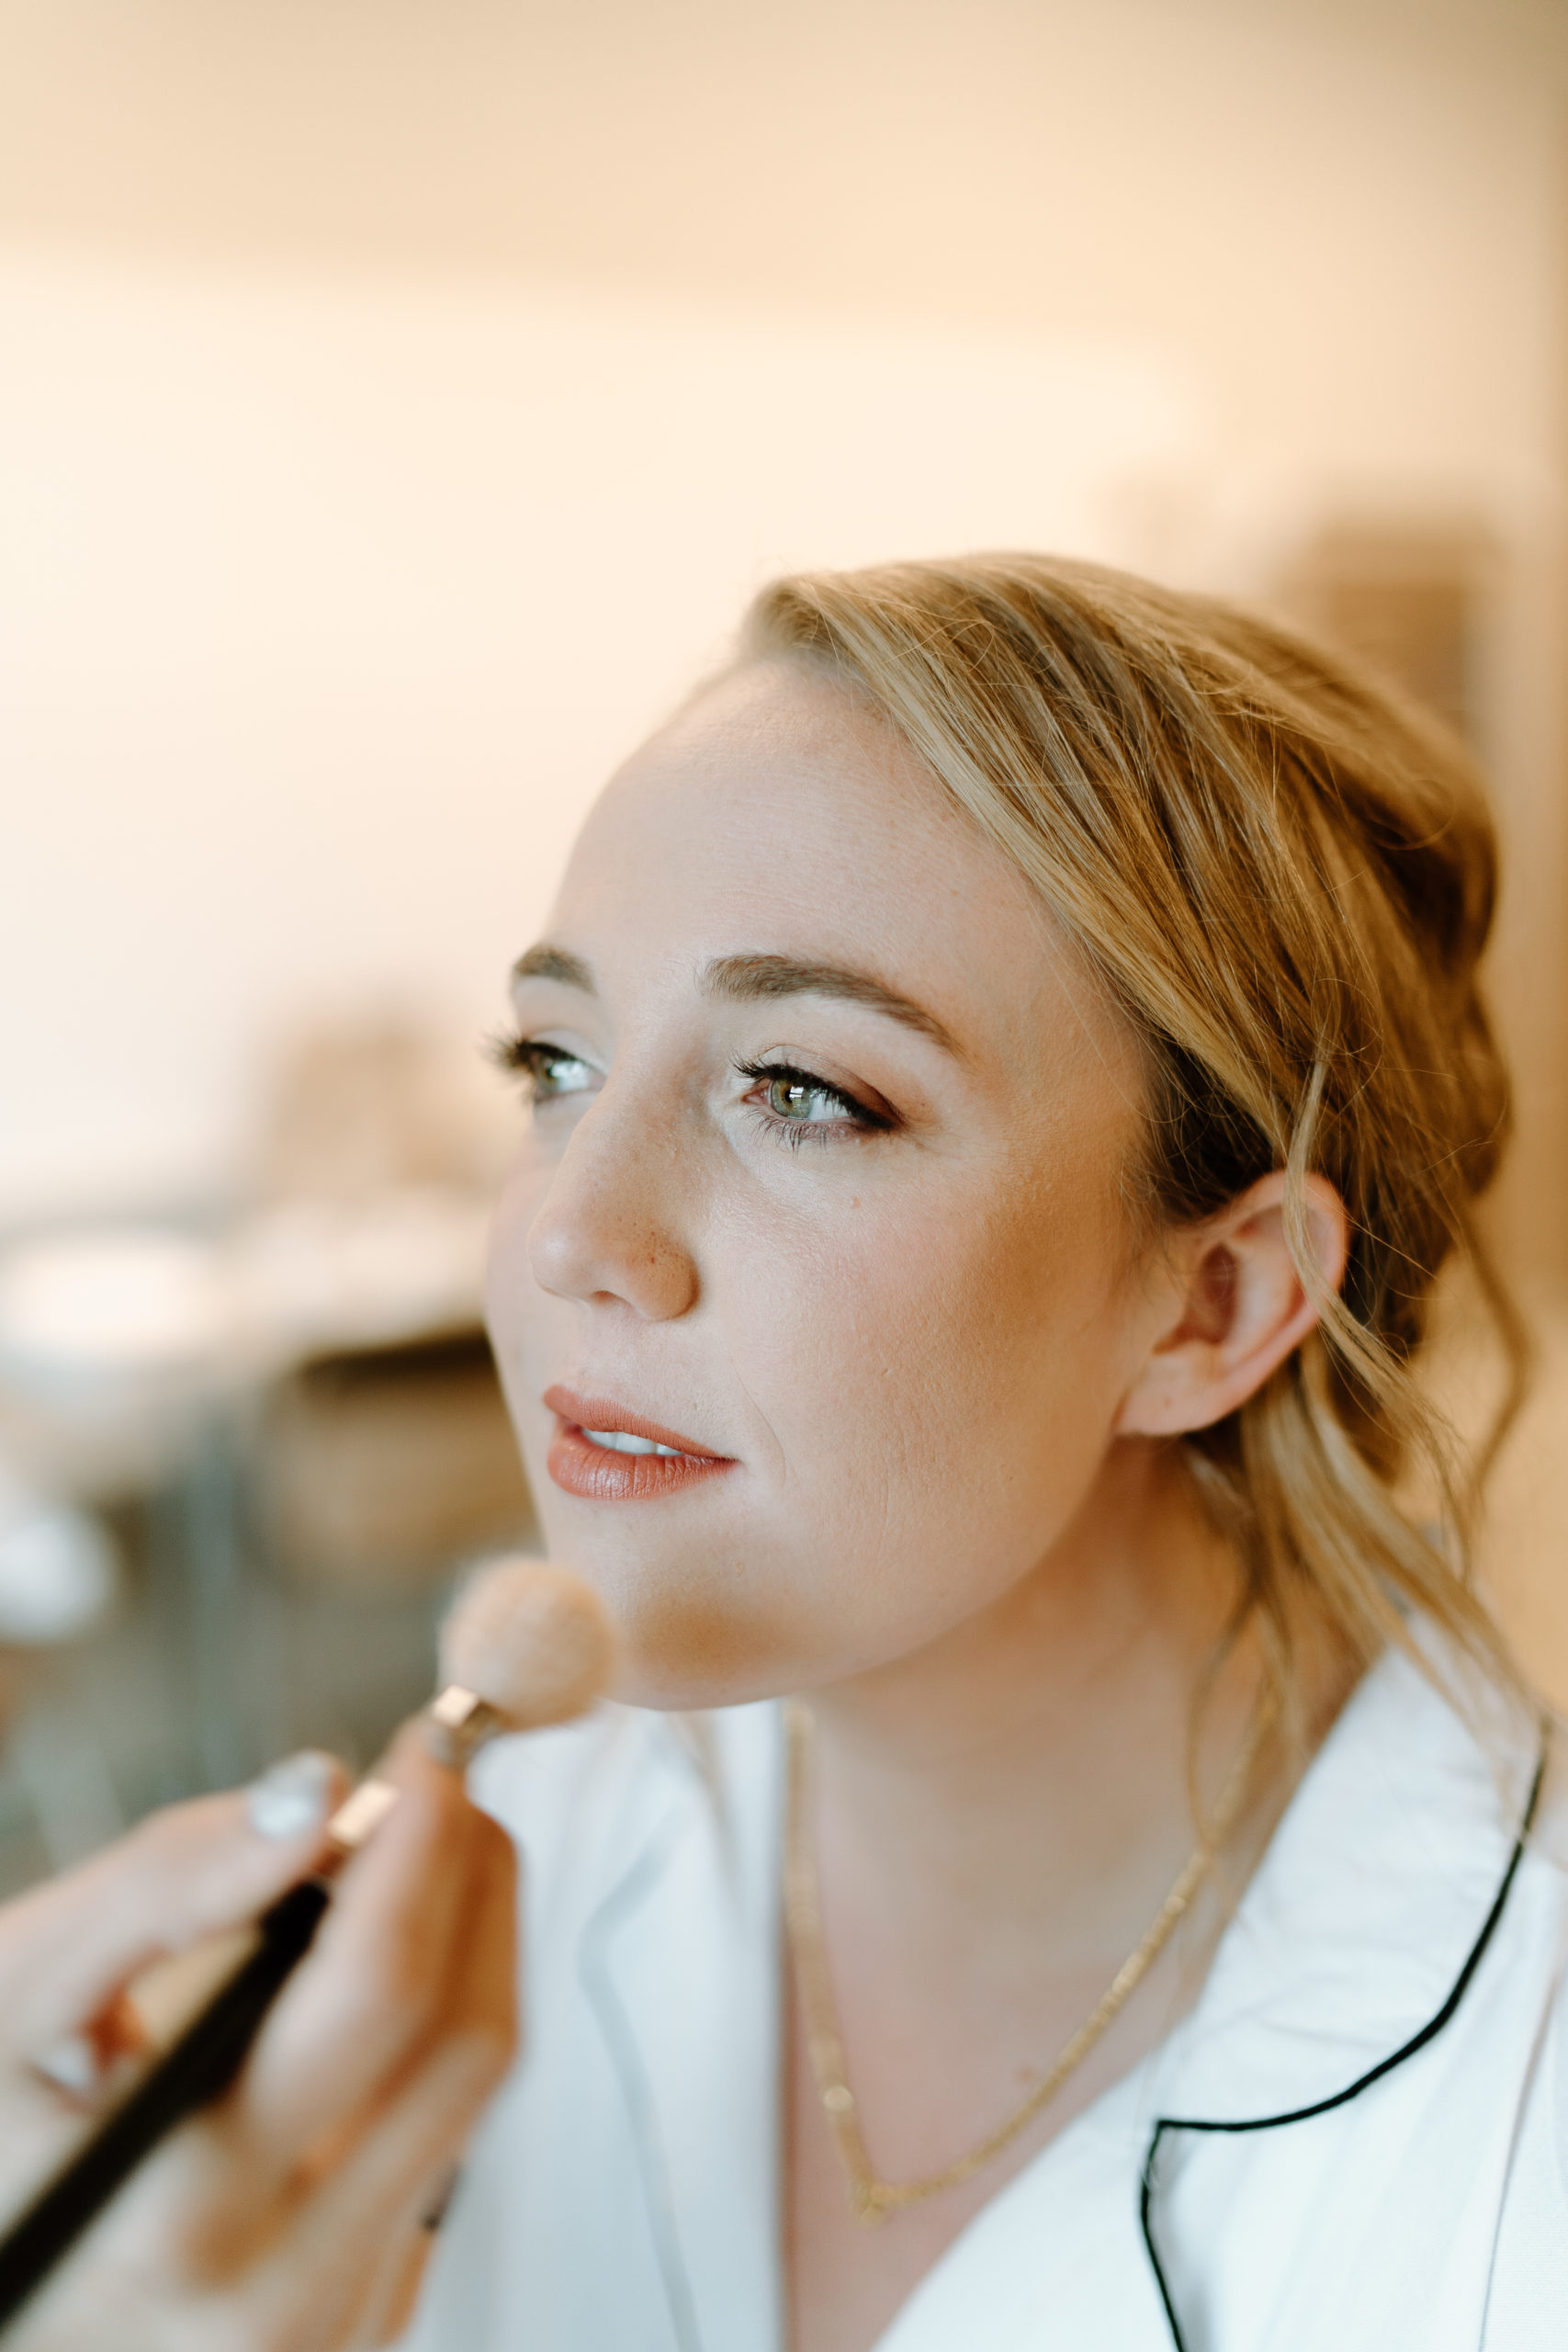 This is a picture of a bride getting her makeup done on her wedding day